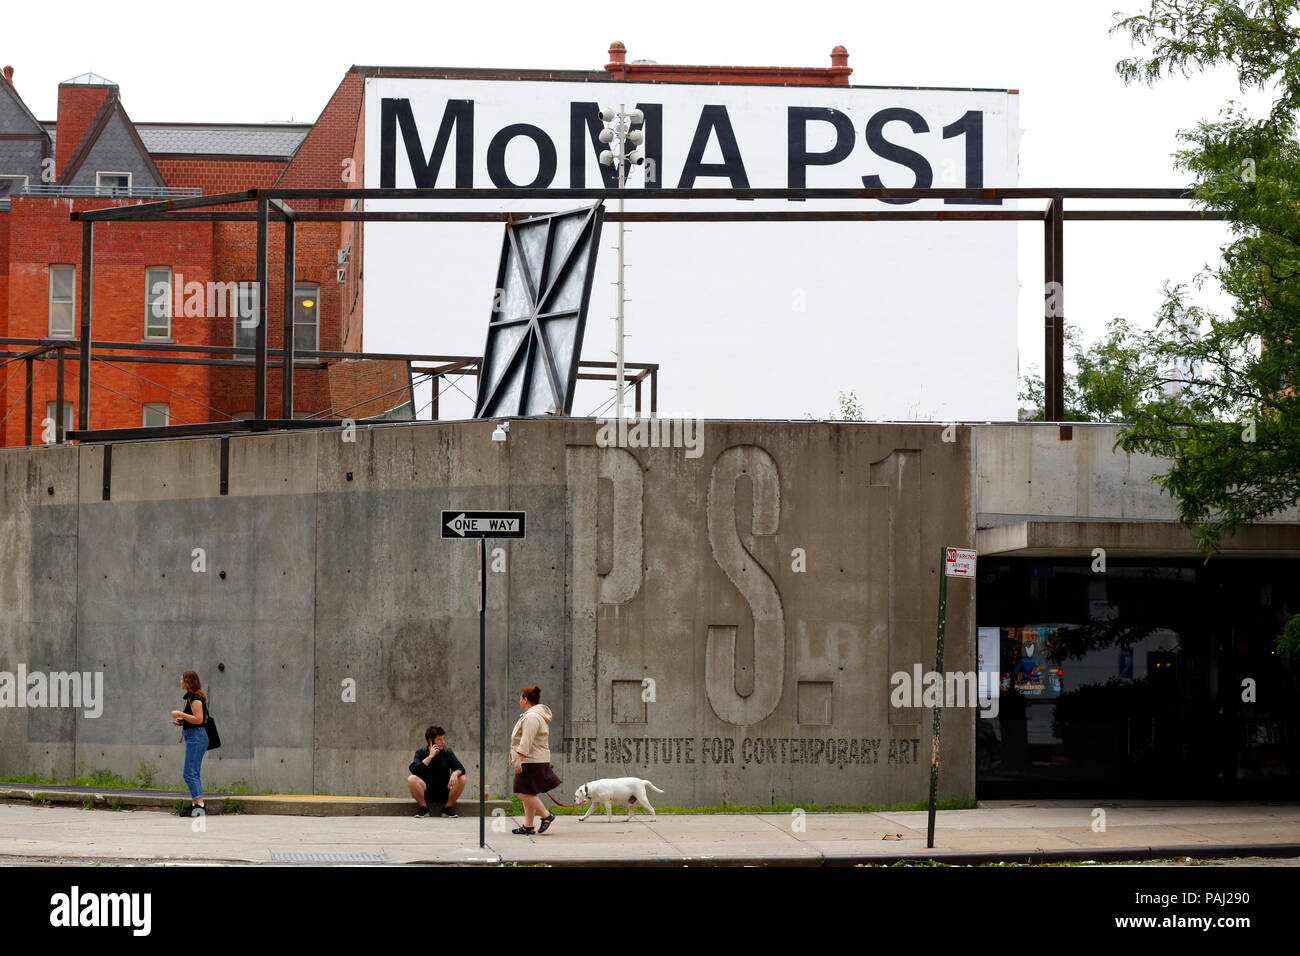 MoMA PS1, 22-25 Jackson Ave, Queens, New York. NYC storefront photo of a contemporary art museum in the Long Island City neighborhood. Stock Photo